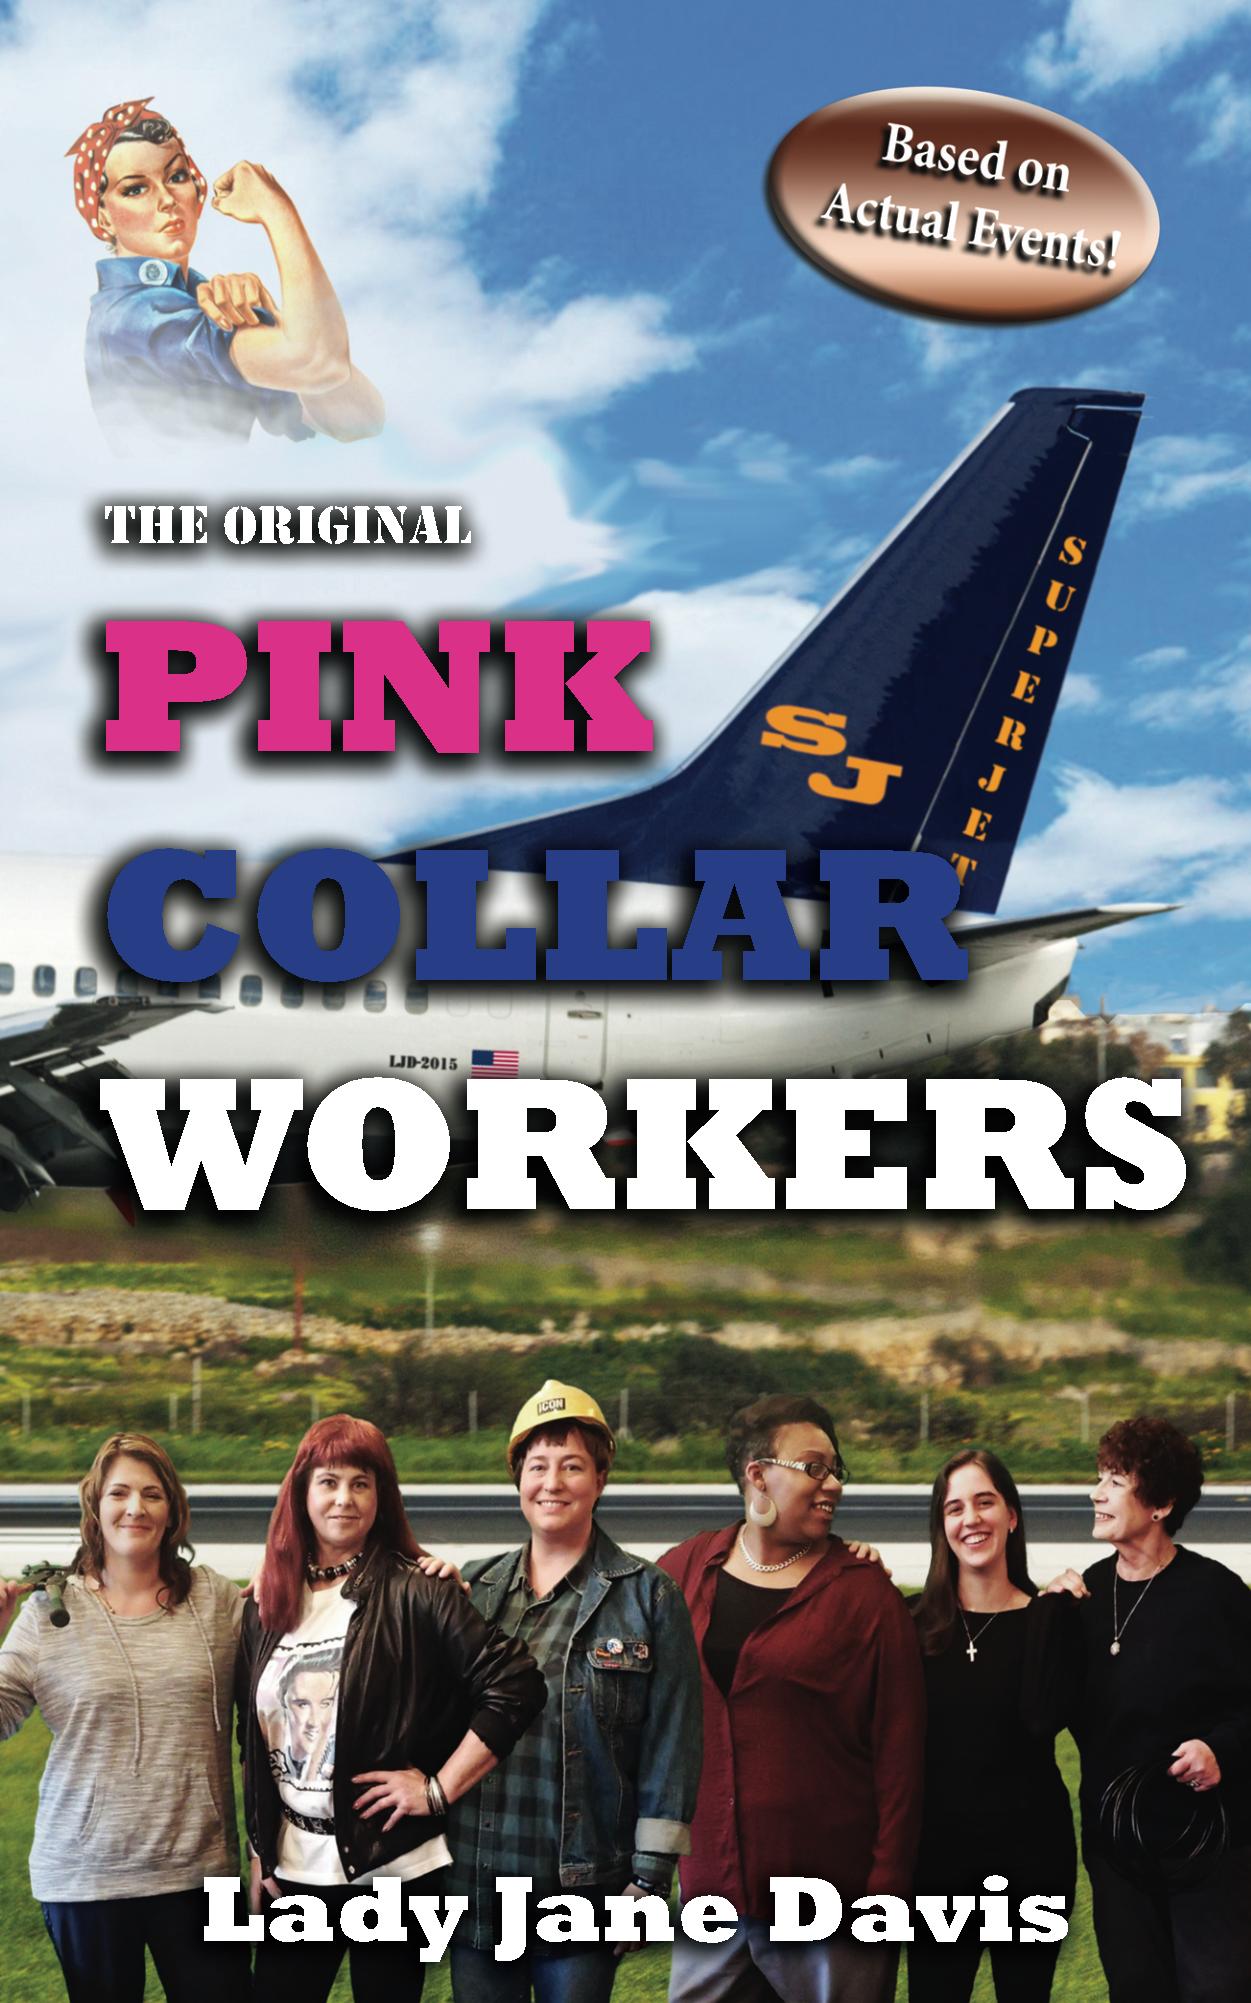 FREE: The Original Pink Collar Workers by Lady Jane Davis